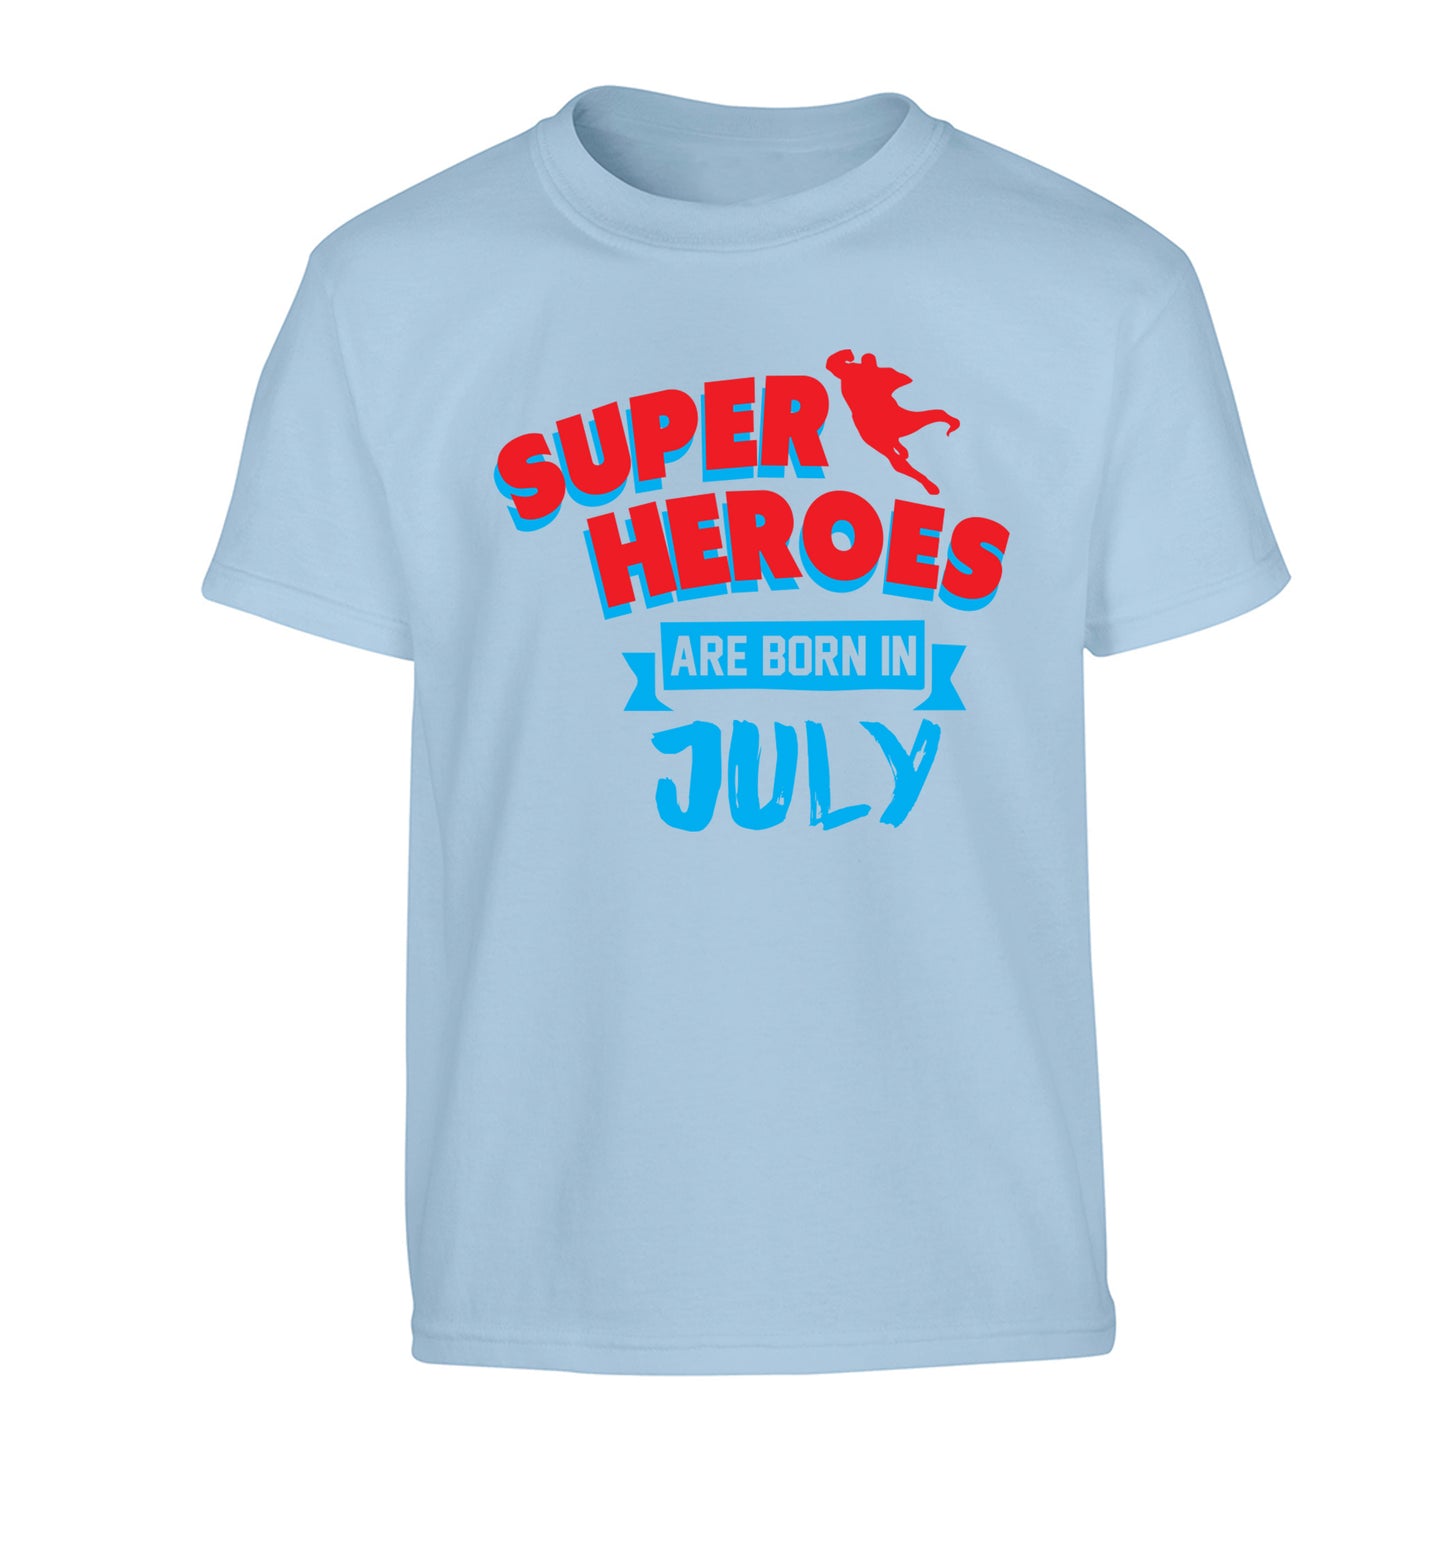 Superheroes are born in July Children's light blue Tshirt 12-13 Years